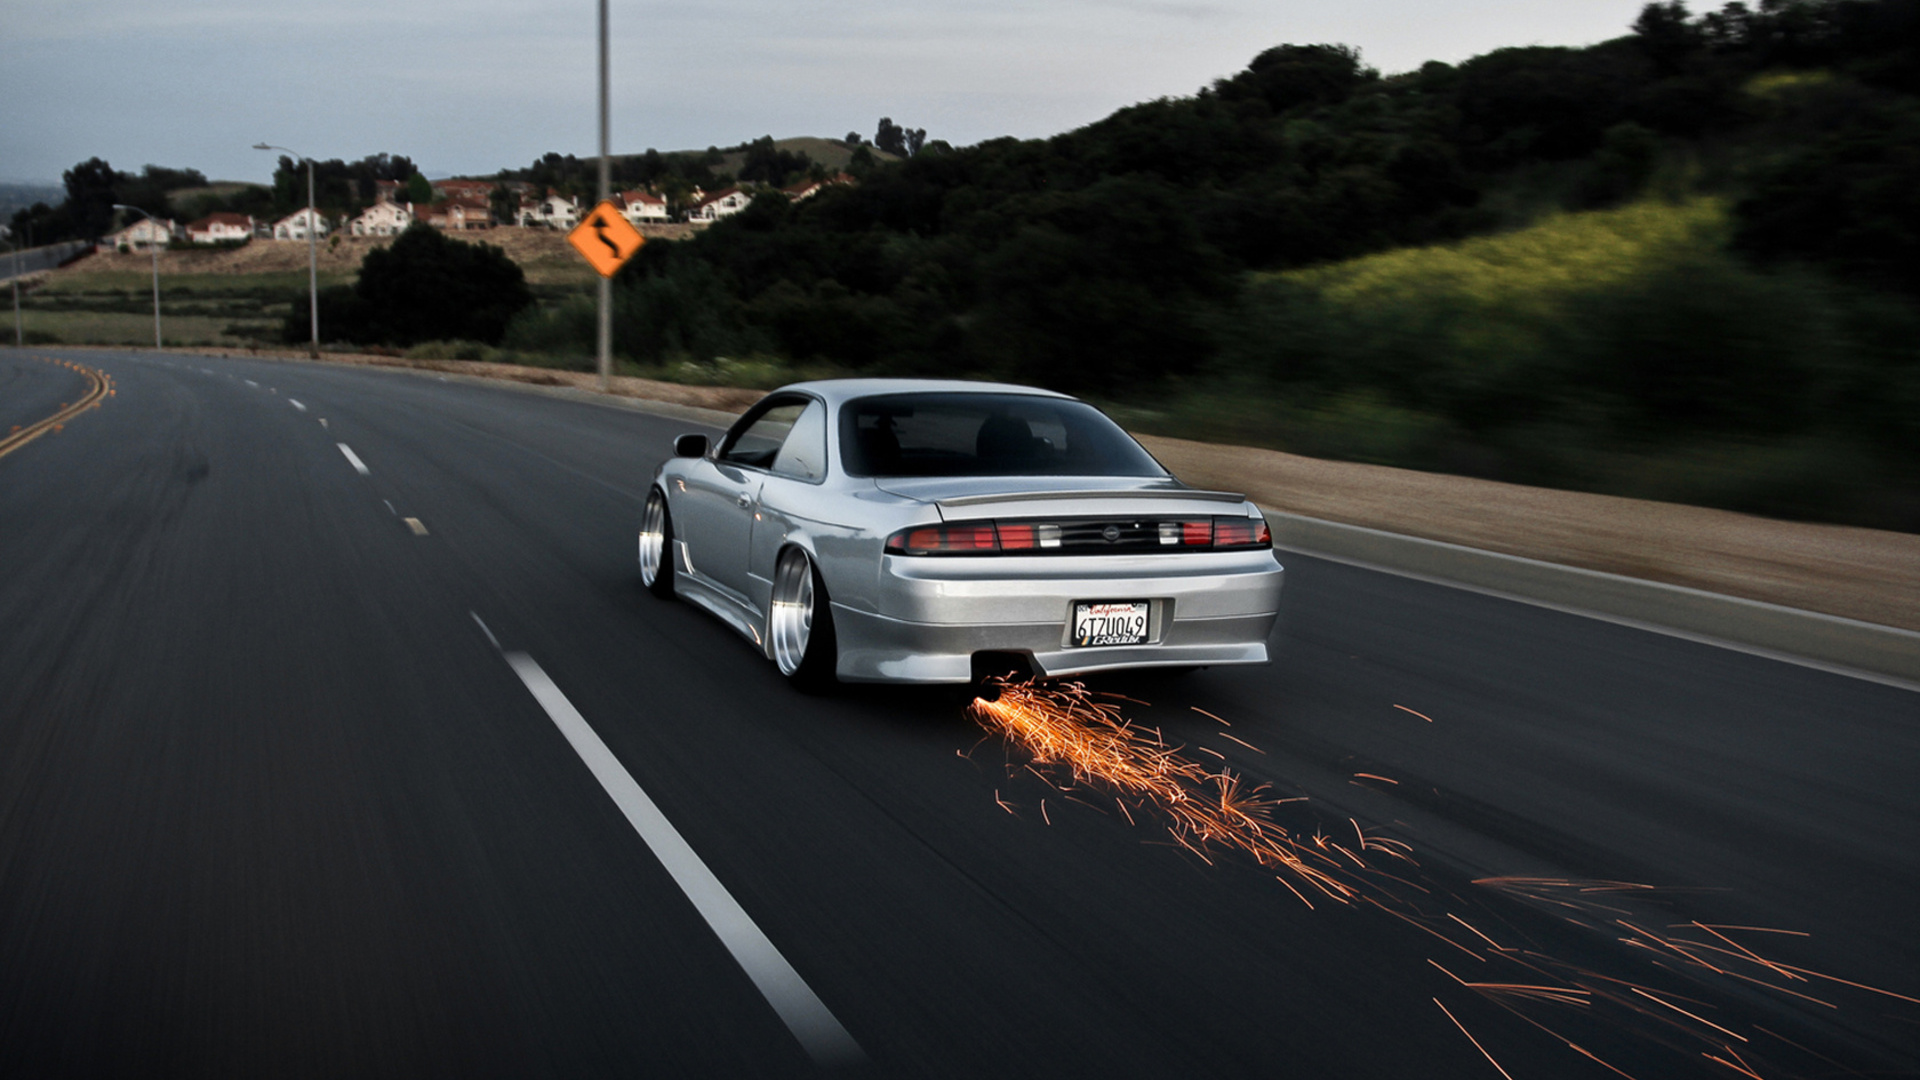 Tuning Stance Roads Sparks Fire Low Silver Wheels Wallpaper Background